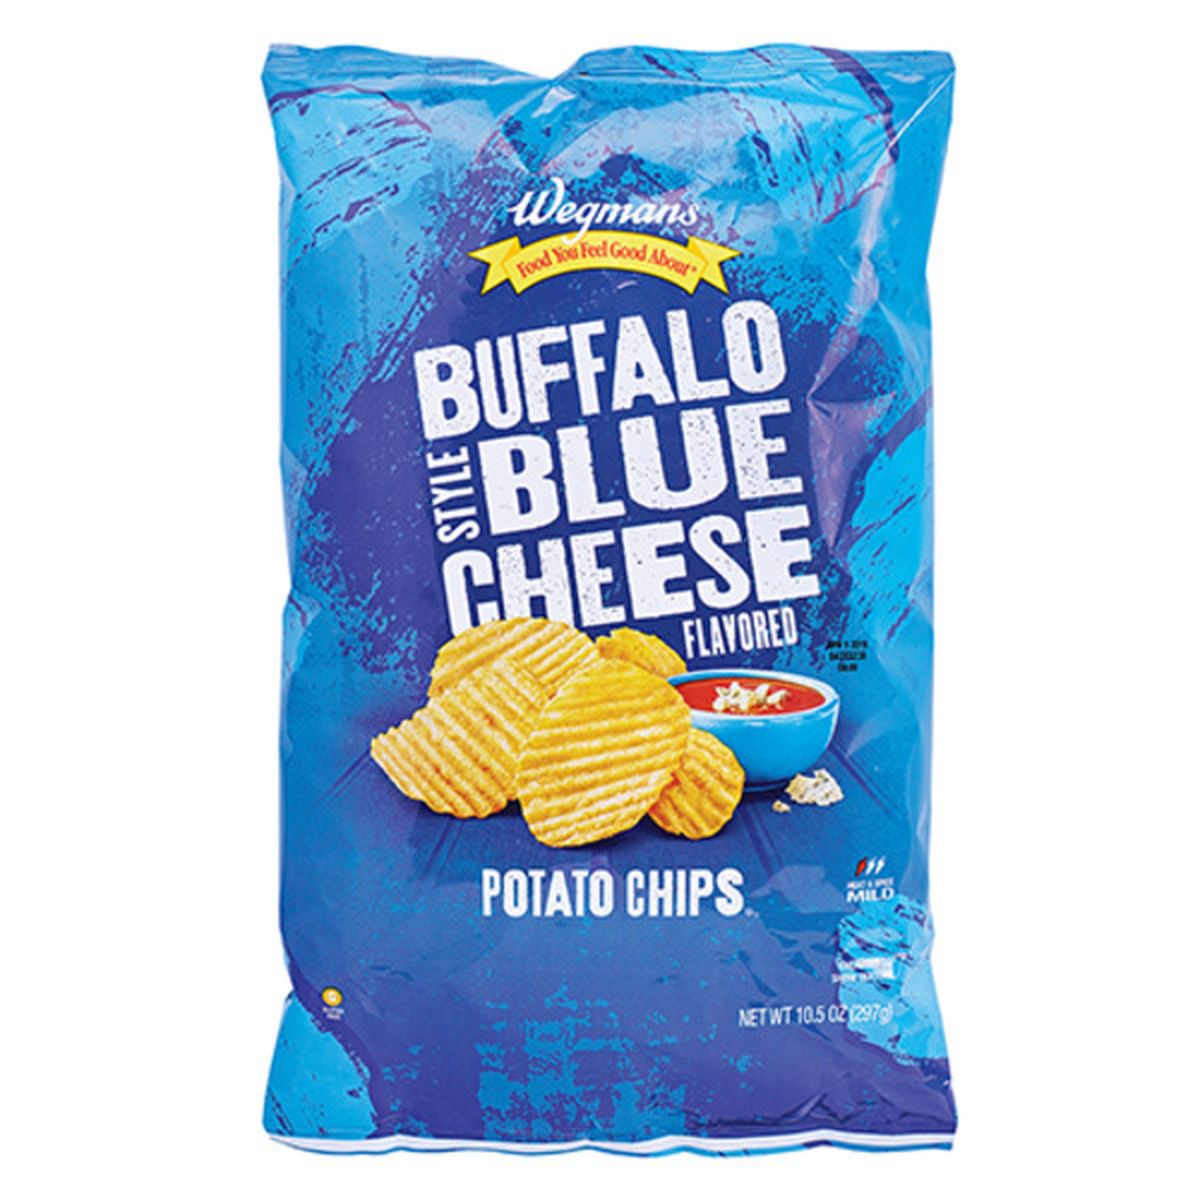 Calories in Wegmans Buffalo Style Blue Cheese Flavored Potato Chips